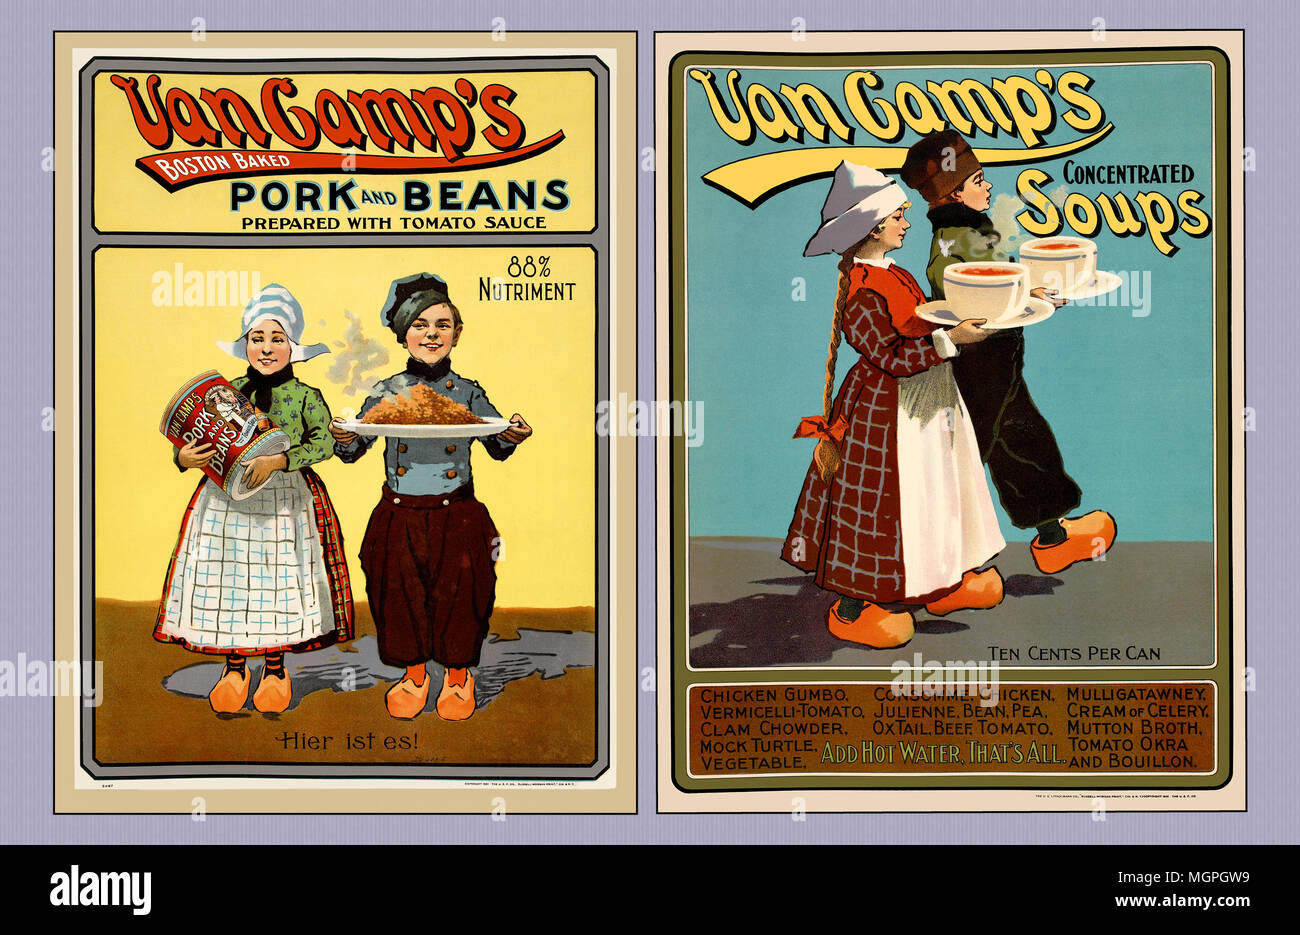 Hans And Lena 1901 Vintage Canned Goods ad combined in one image (poster). Stock Photo